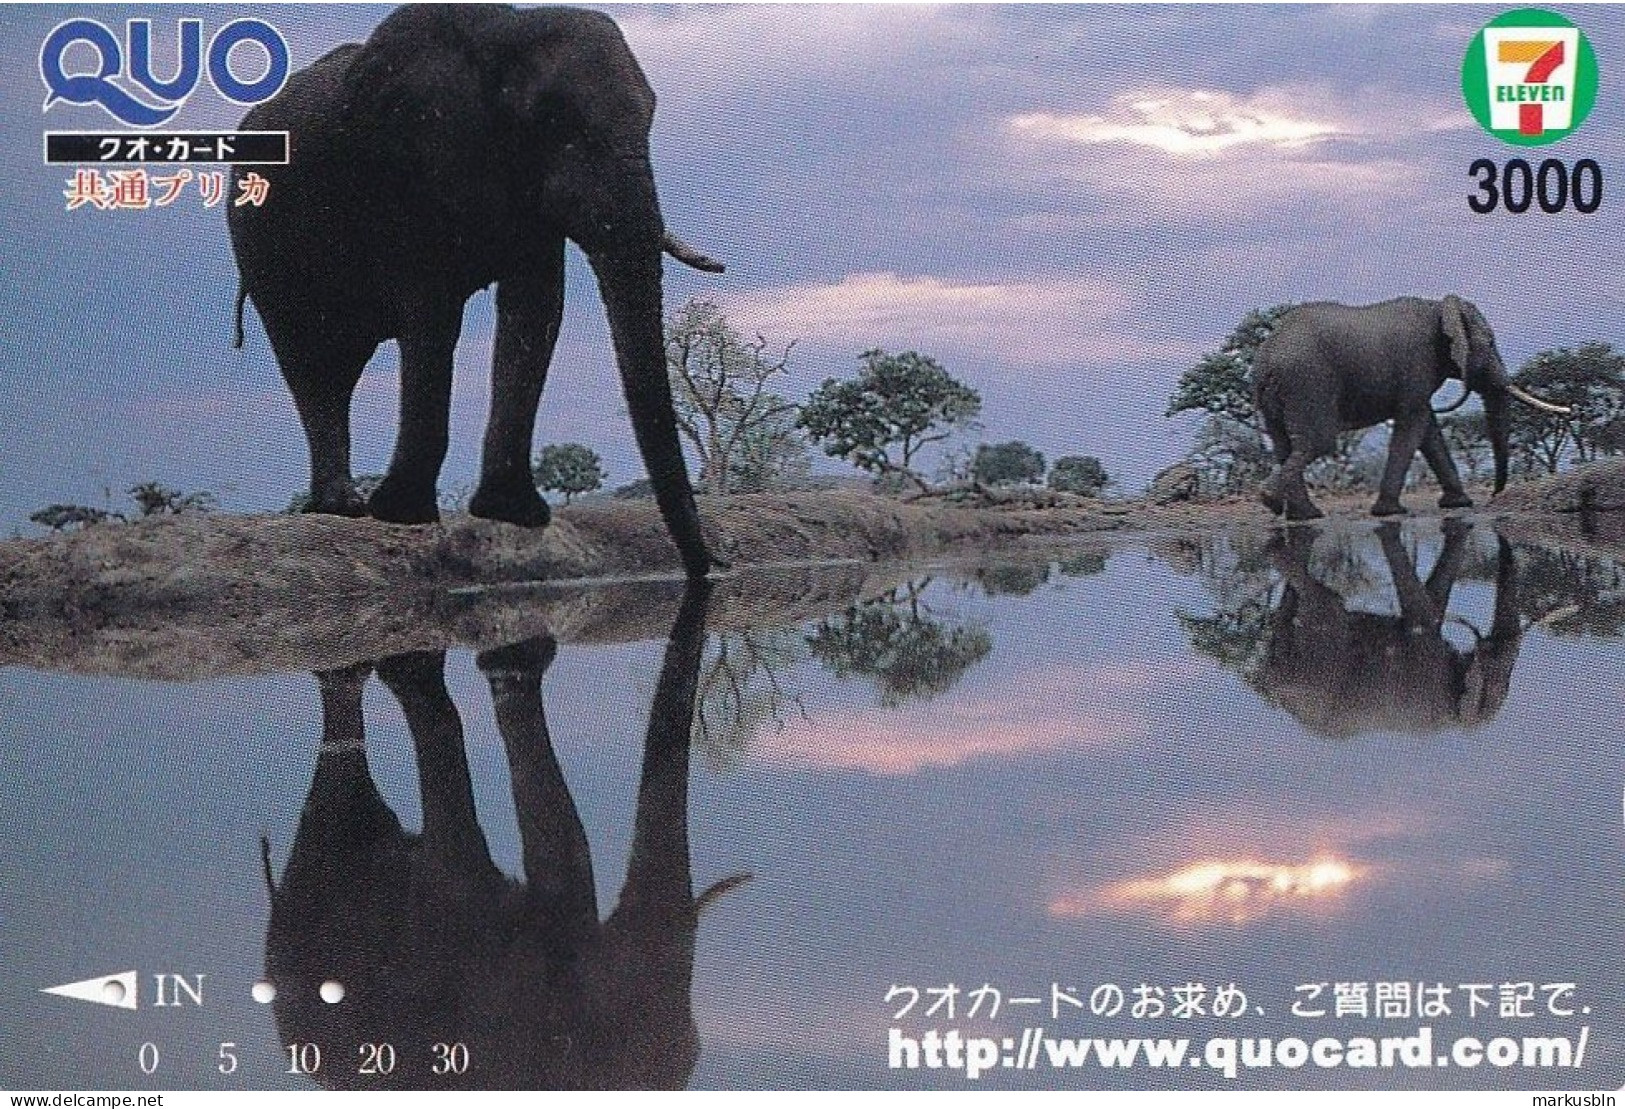 Japan Prepaid Quo Card 3000 - 7 Eleven Sunset Elephants - Giappone